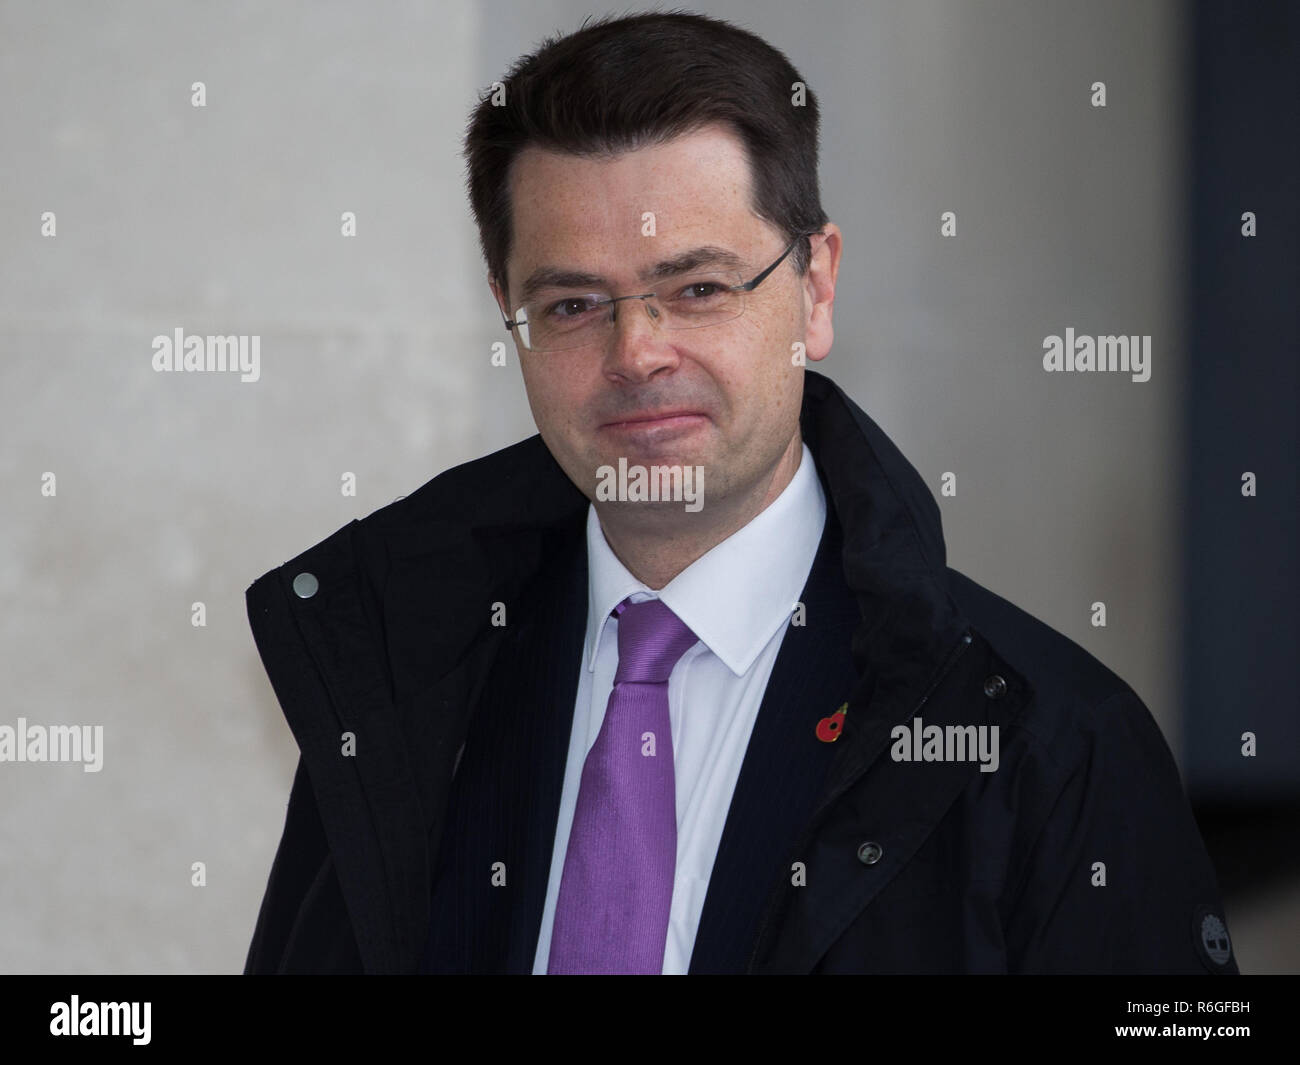 James Brokenshire MP, Secretary of State for Housing, Communities and Local Government, arrives at the BBC for the Andrew Marr Show, London, UK  Featuring: James Brokenshire MP Where: London, United Kingdom When: 04 Nov 2018 Credit: Wheatley/WENN Stock Photo